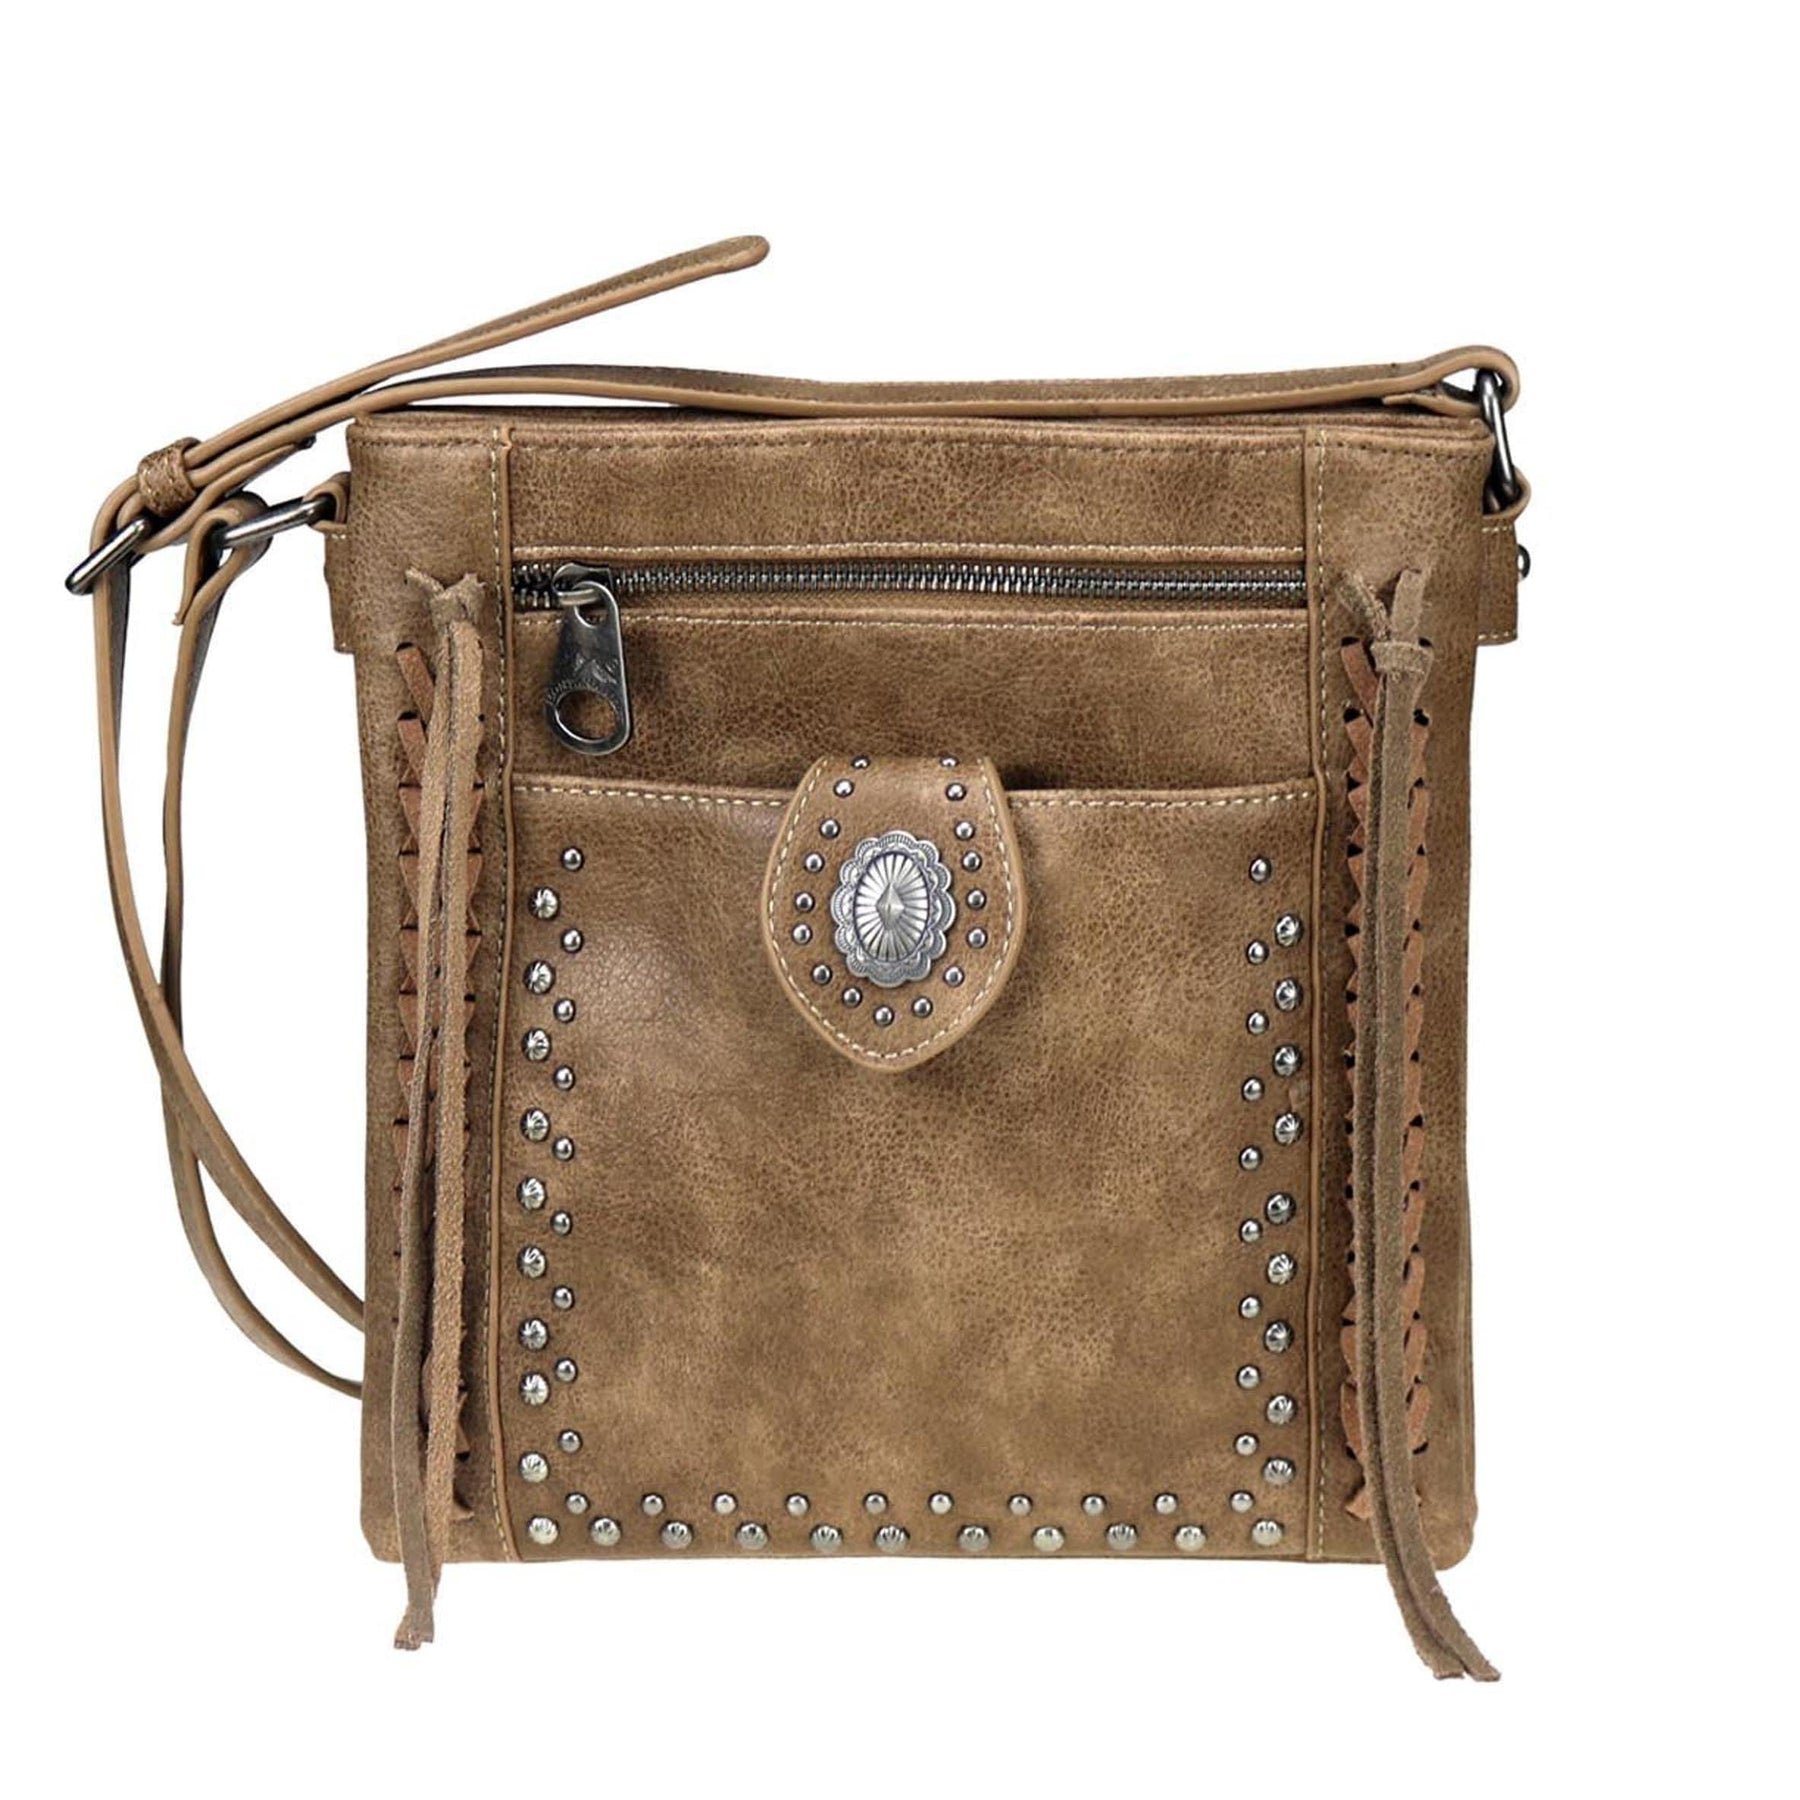 Montana West Real Leather Concho Collection Crossbody Bag Coffee